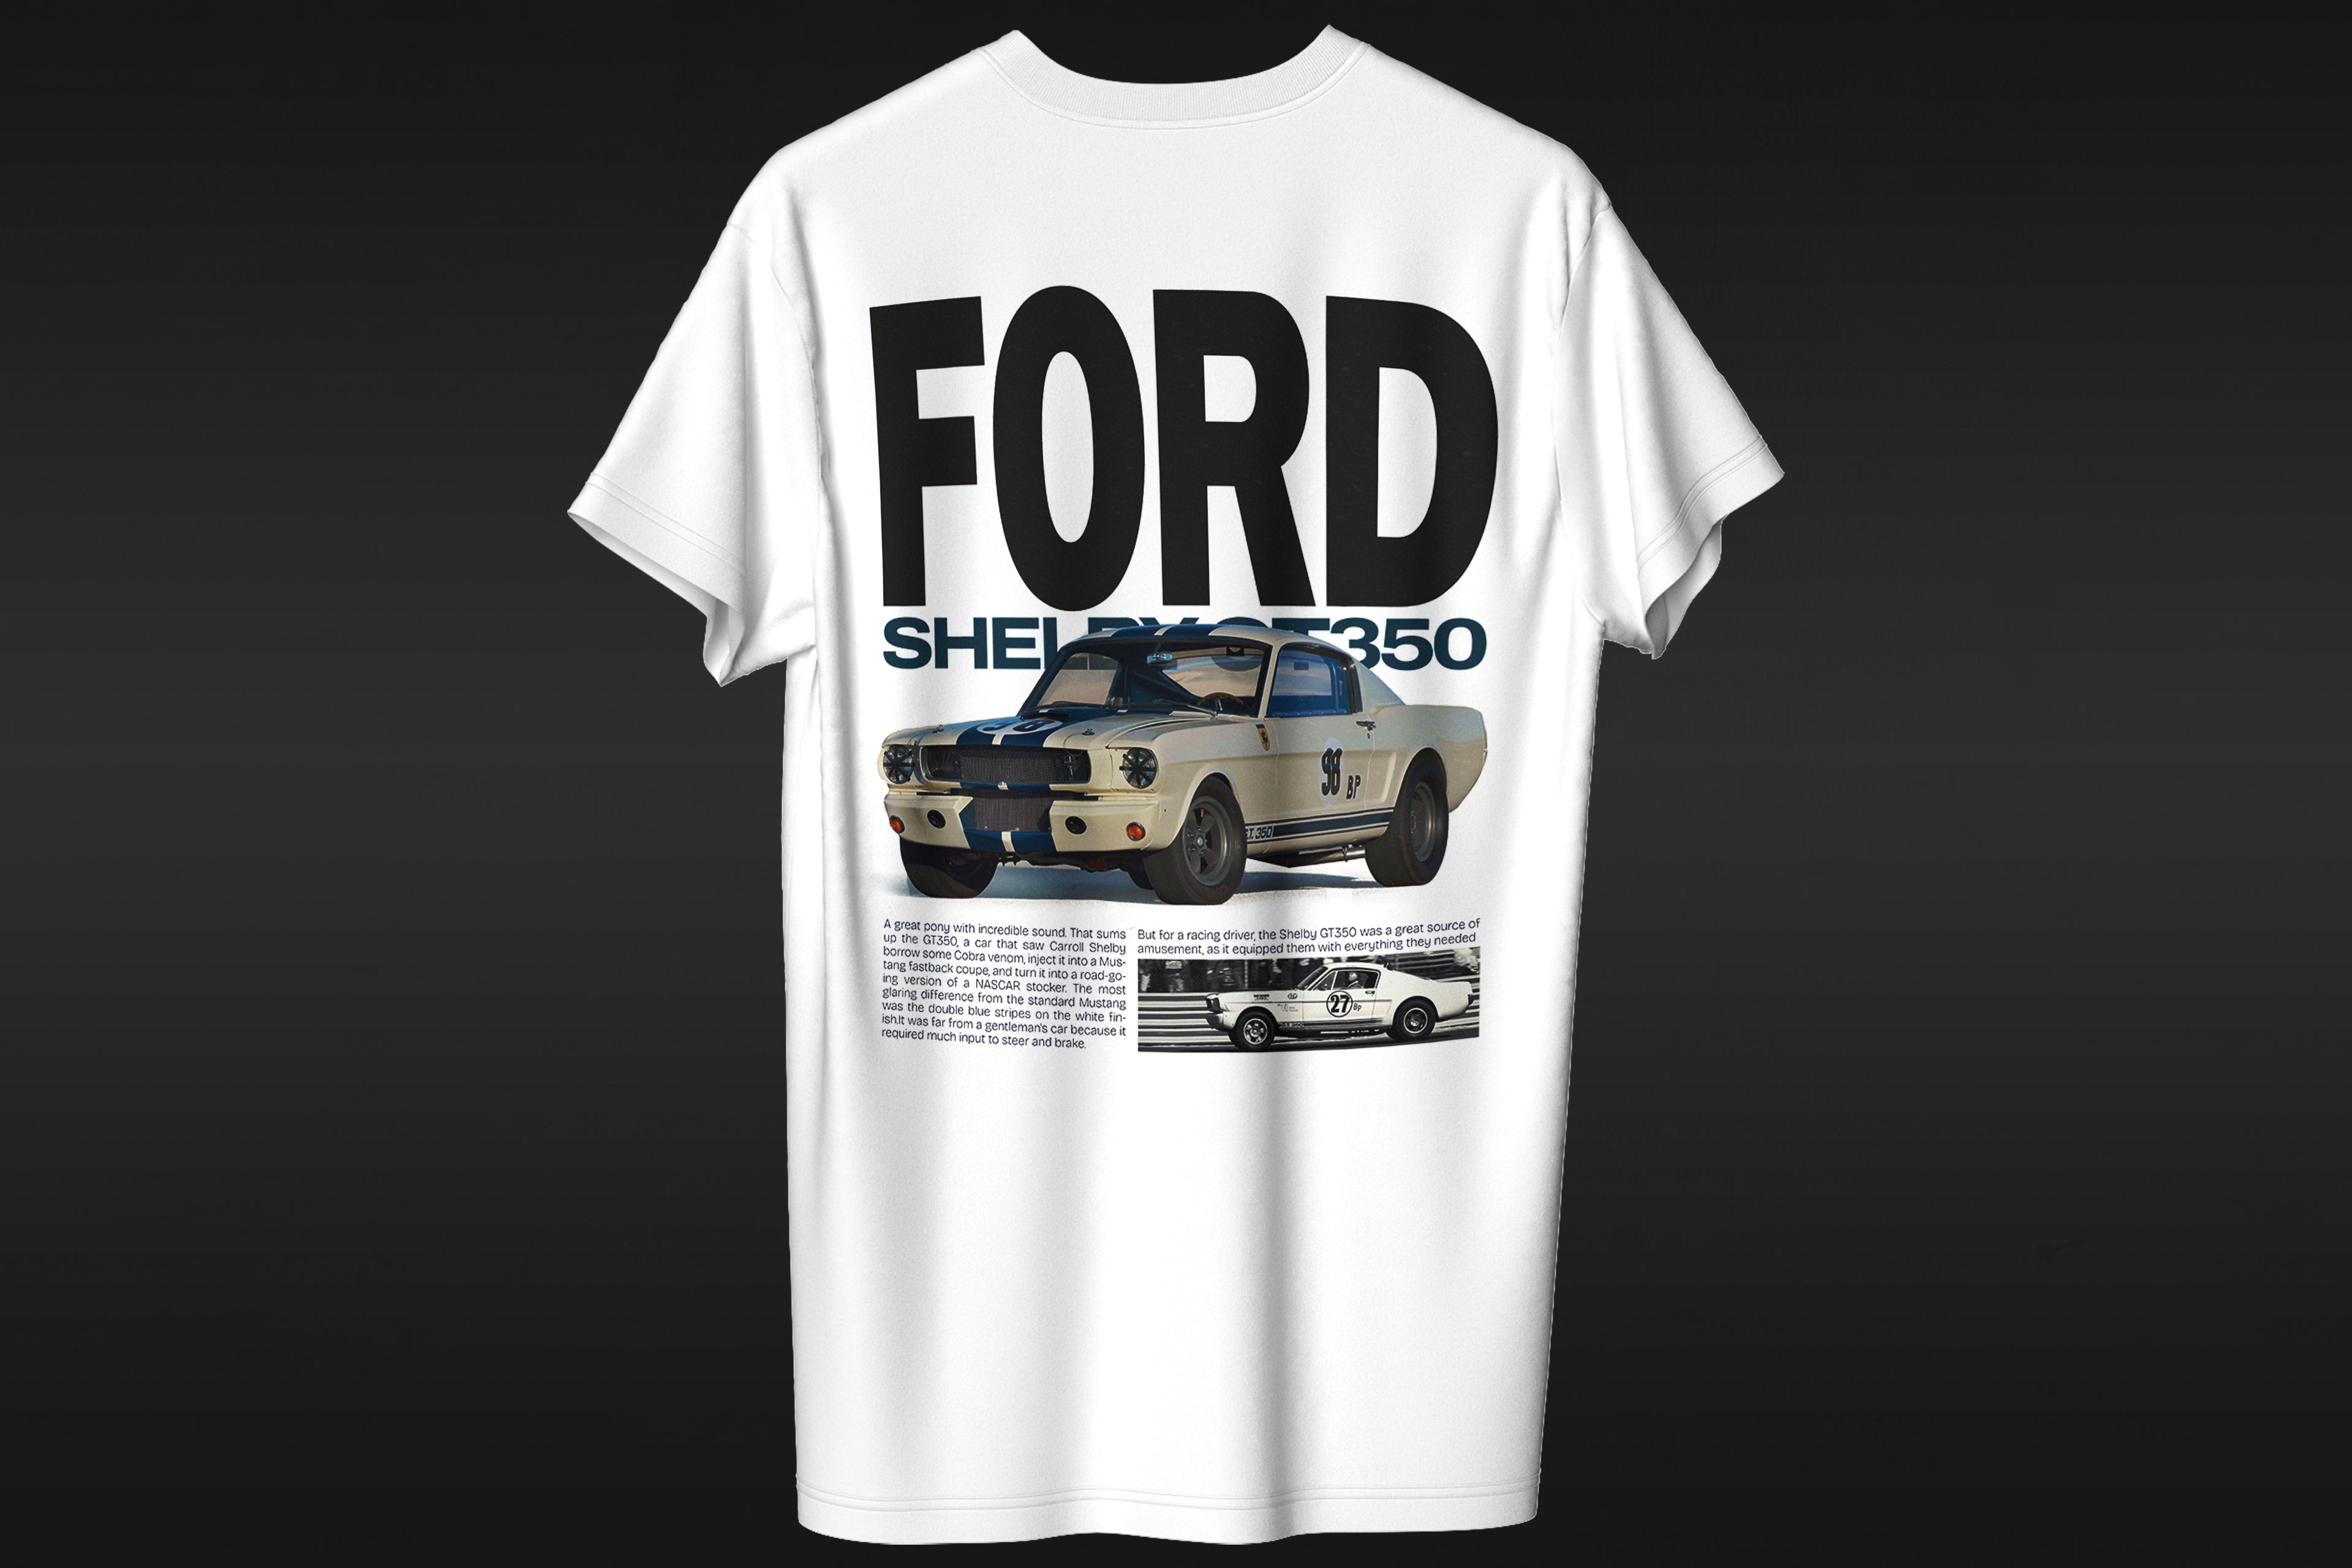 Ford Shelby GT350 - T-shirt